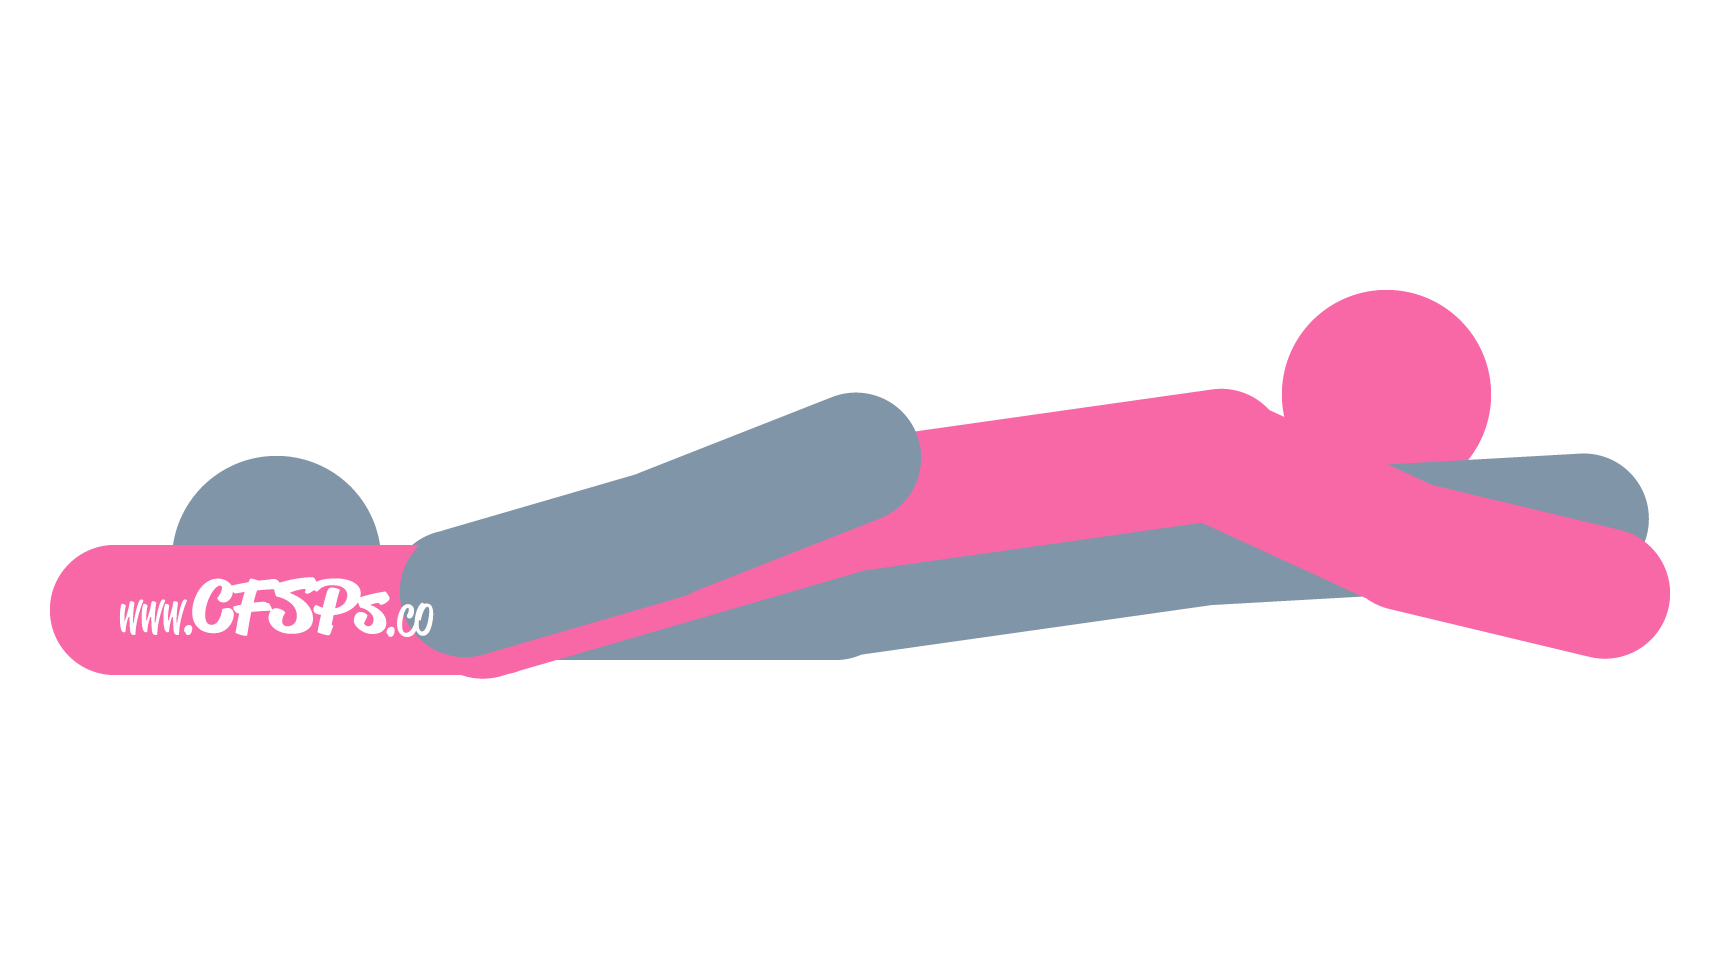 This stick figure image depicts a man and woman having sex in the X-Rated sex position. The man is lying on his back with his legs closed. The woman is lying on top of him, her head near his feet and her pelvis over his. The man has his hands on her butt.